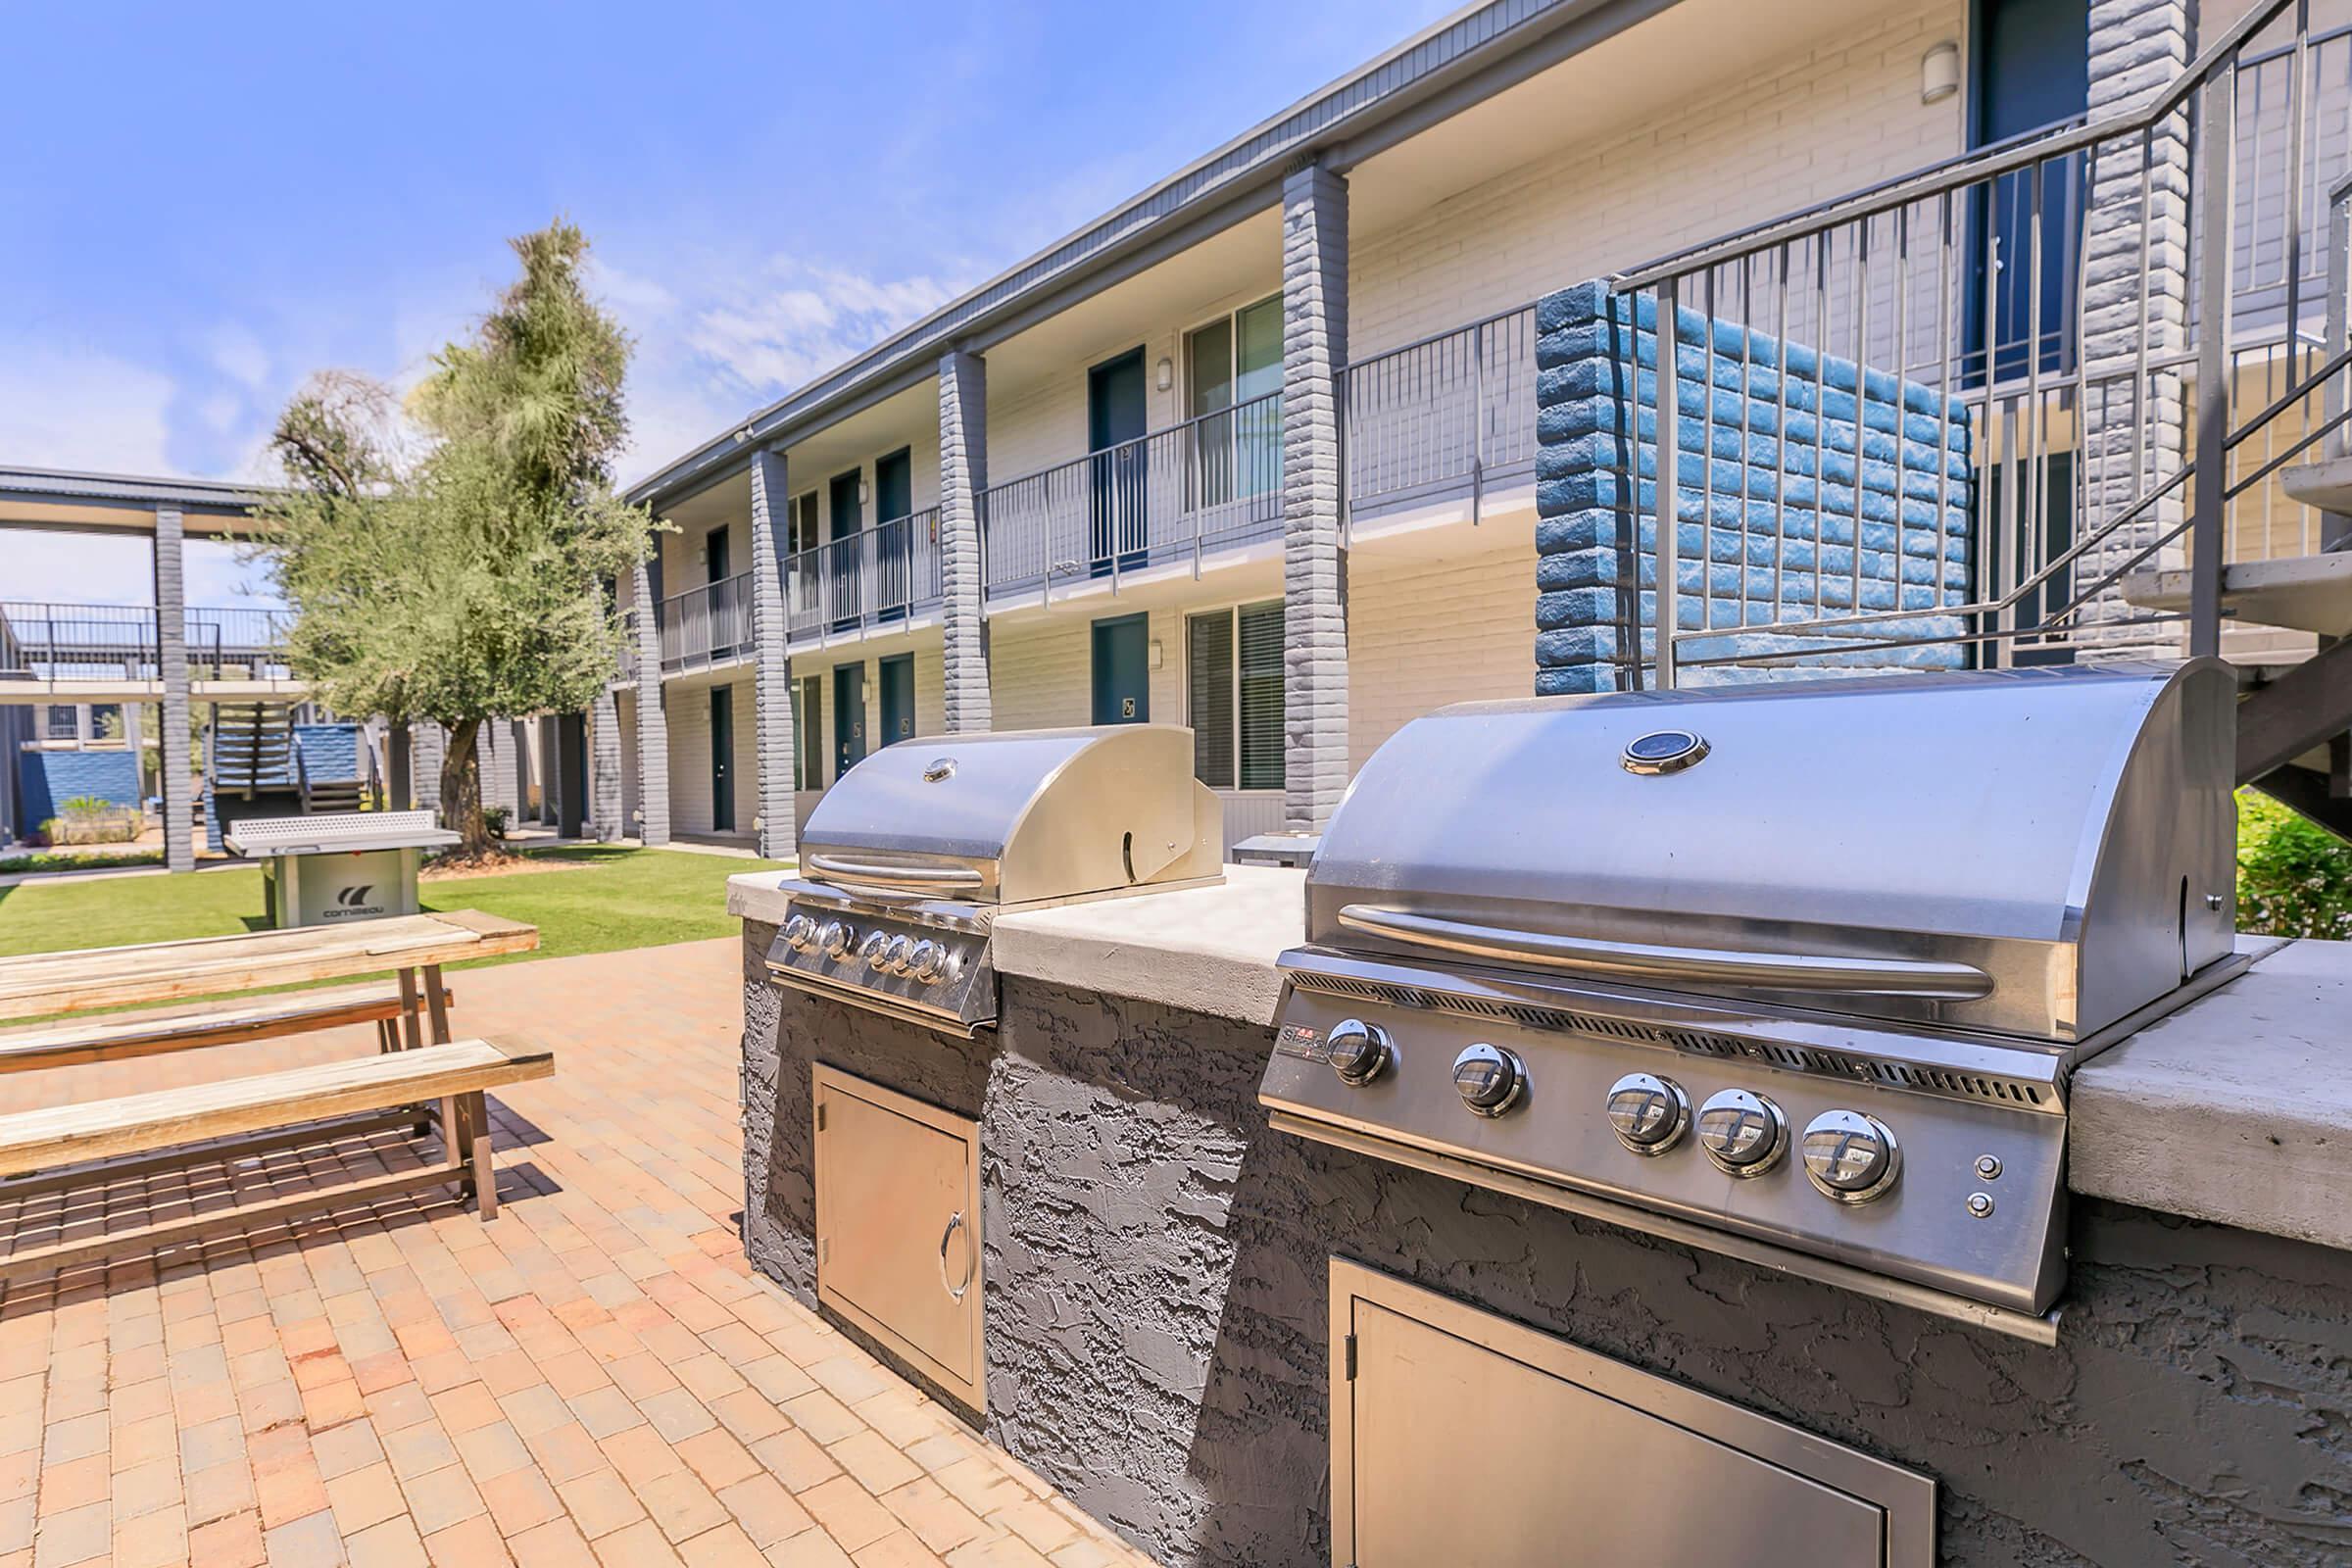 Rise Canyon West's outdoor grilling area with stainless steel bbq grills